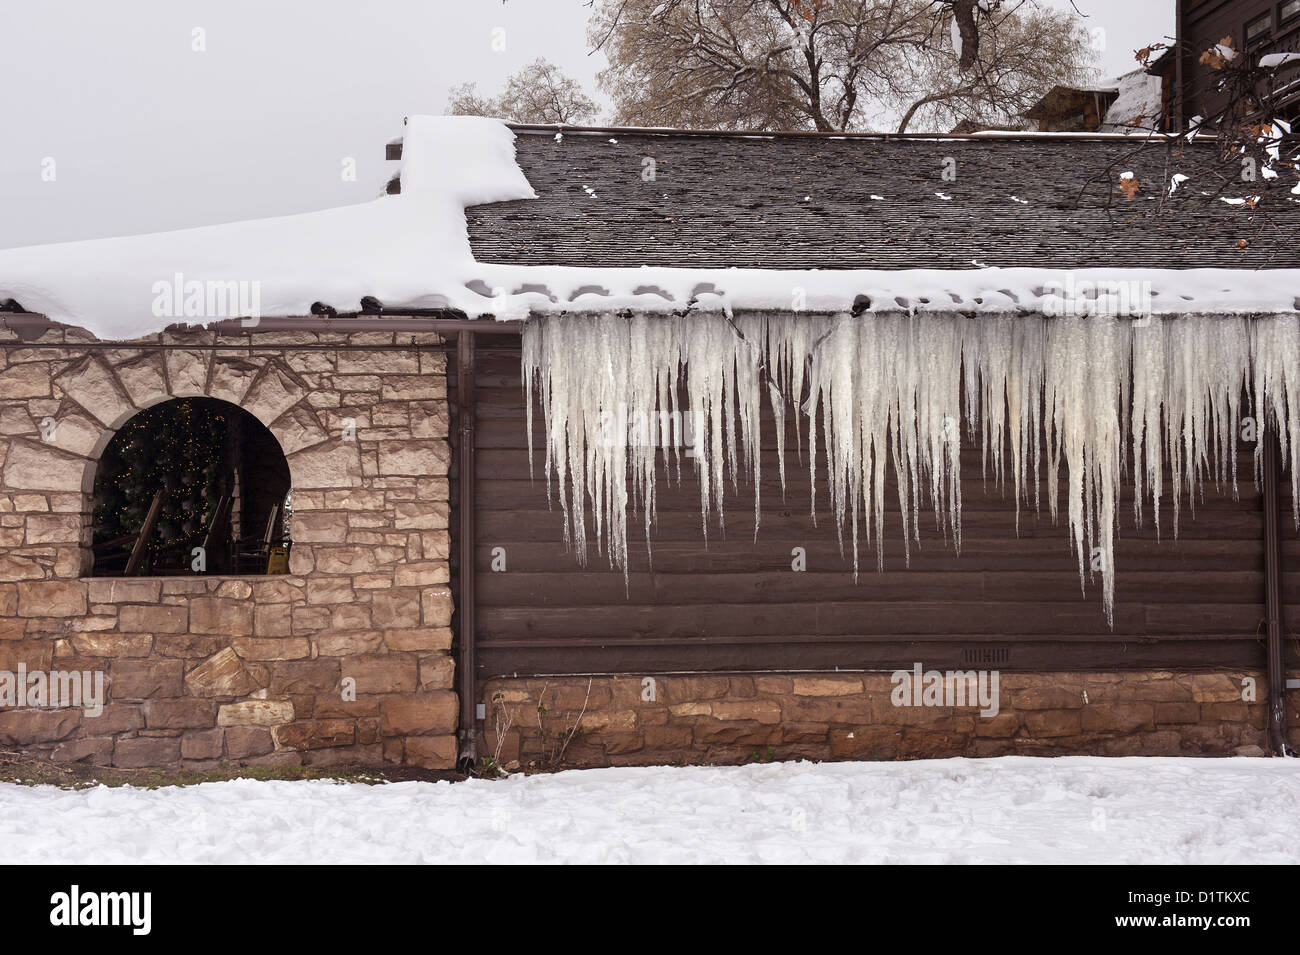 A mountain chalet lodge exterior covered in snow and icicles shows an idyllic winter vacation destination. Stock Photo